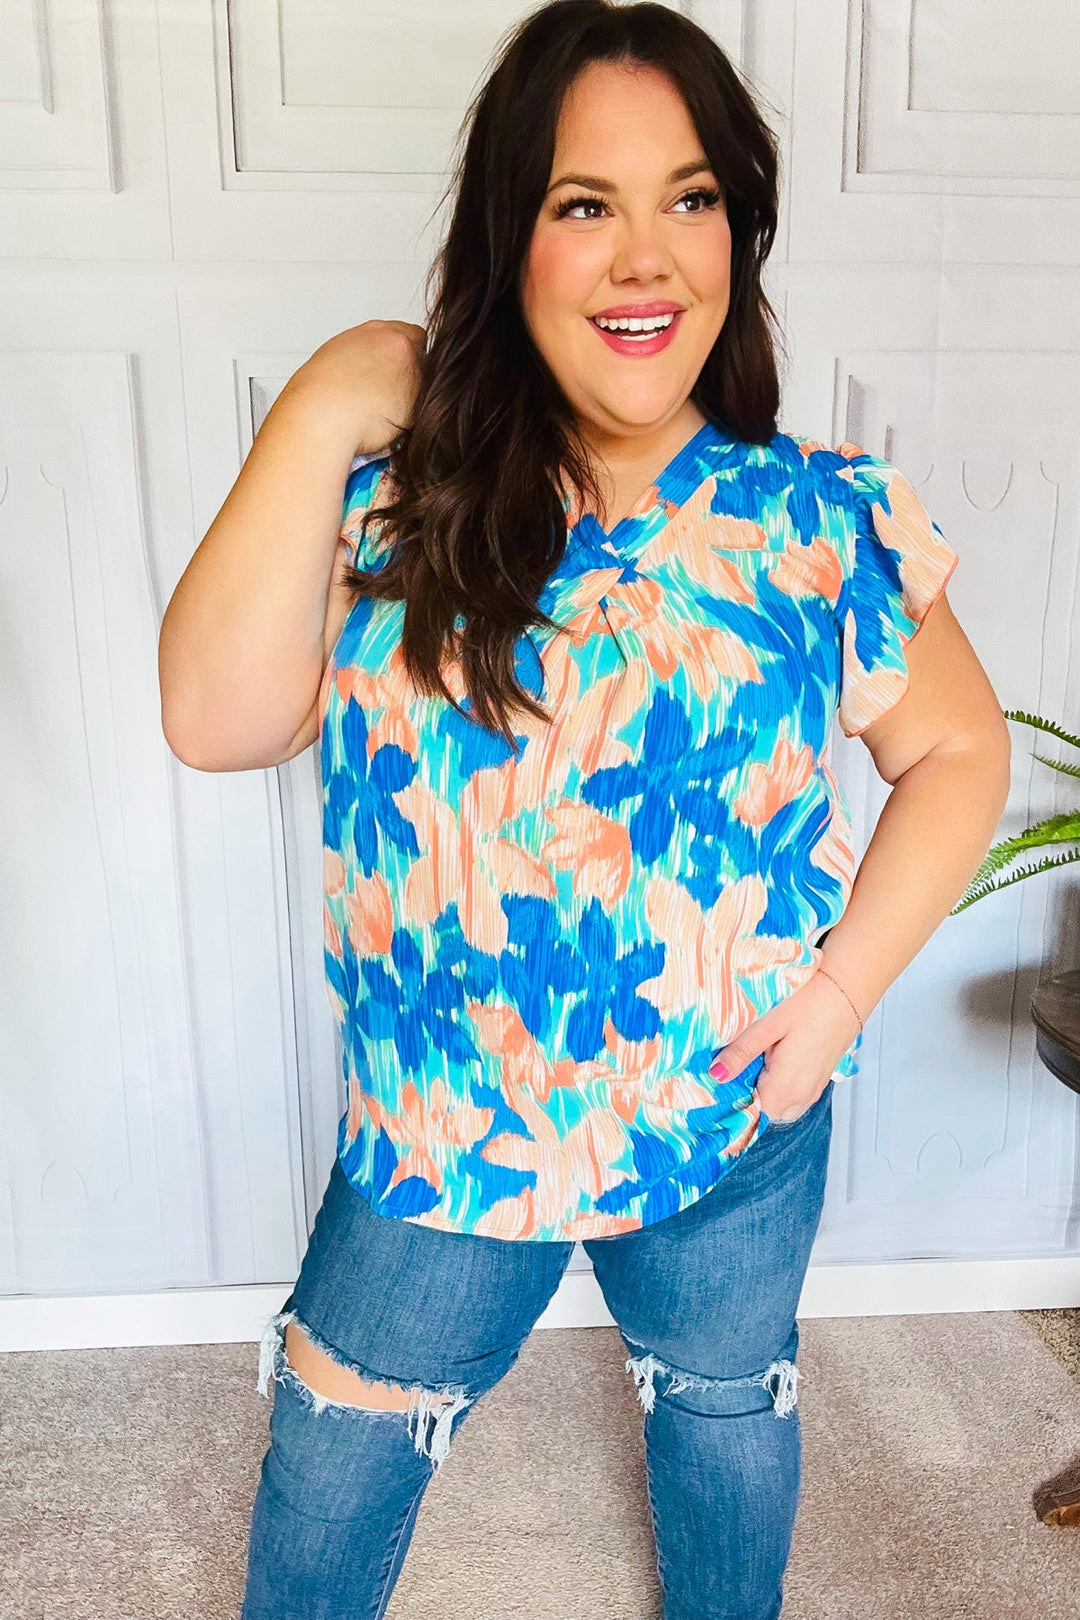 In The Tropics Floral Top - Turquoise